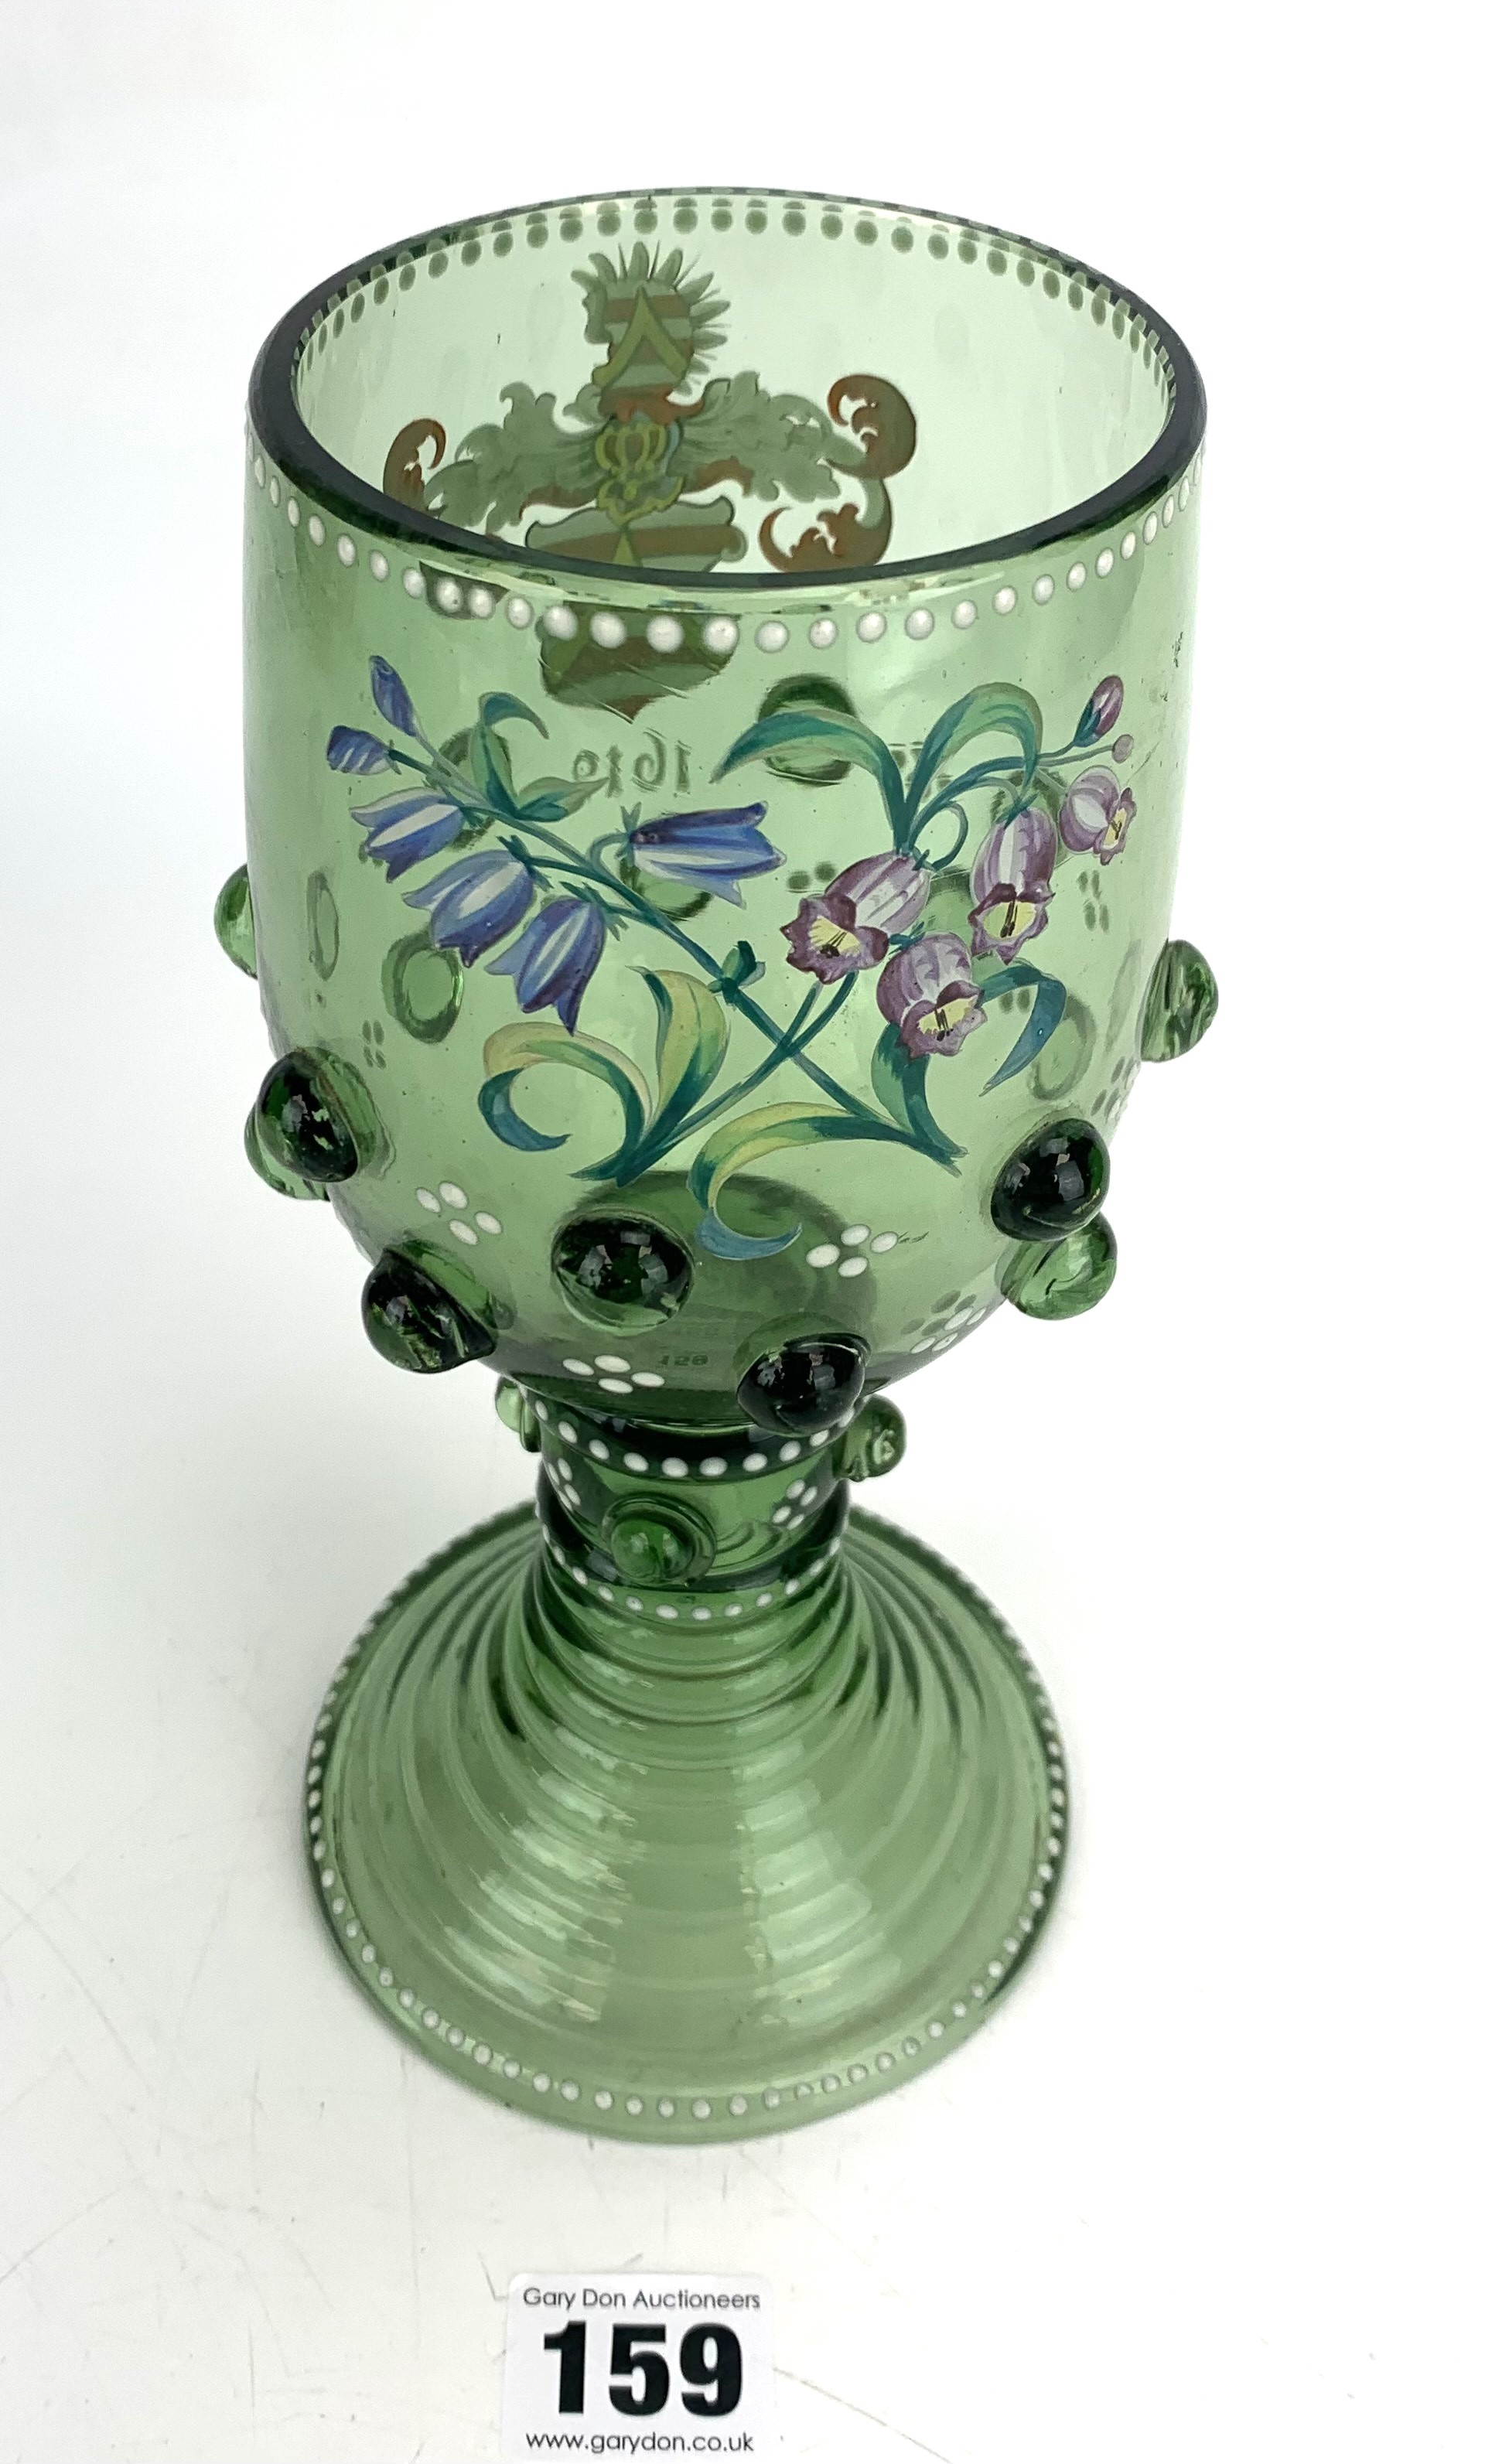 Bohemian glass goblet - Image 3 of 5